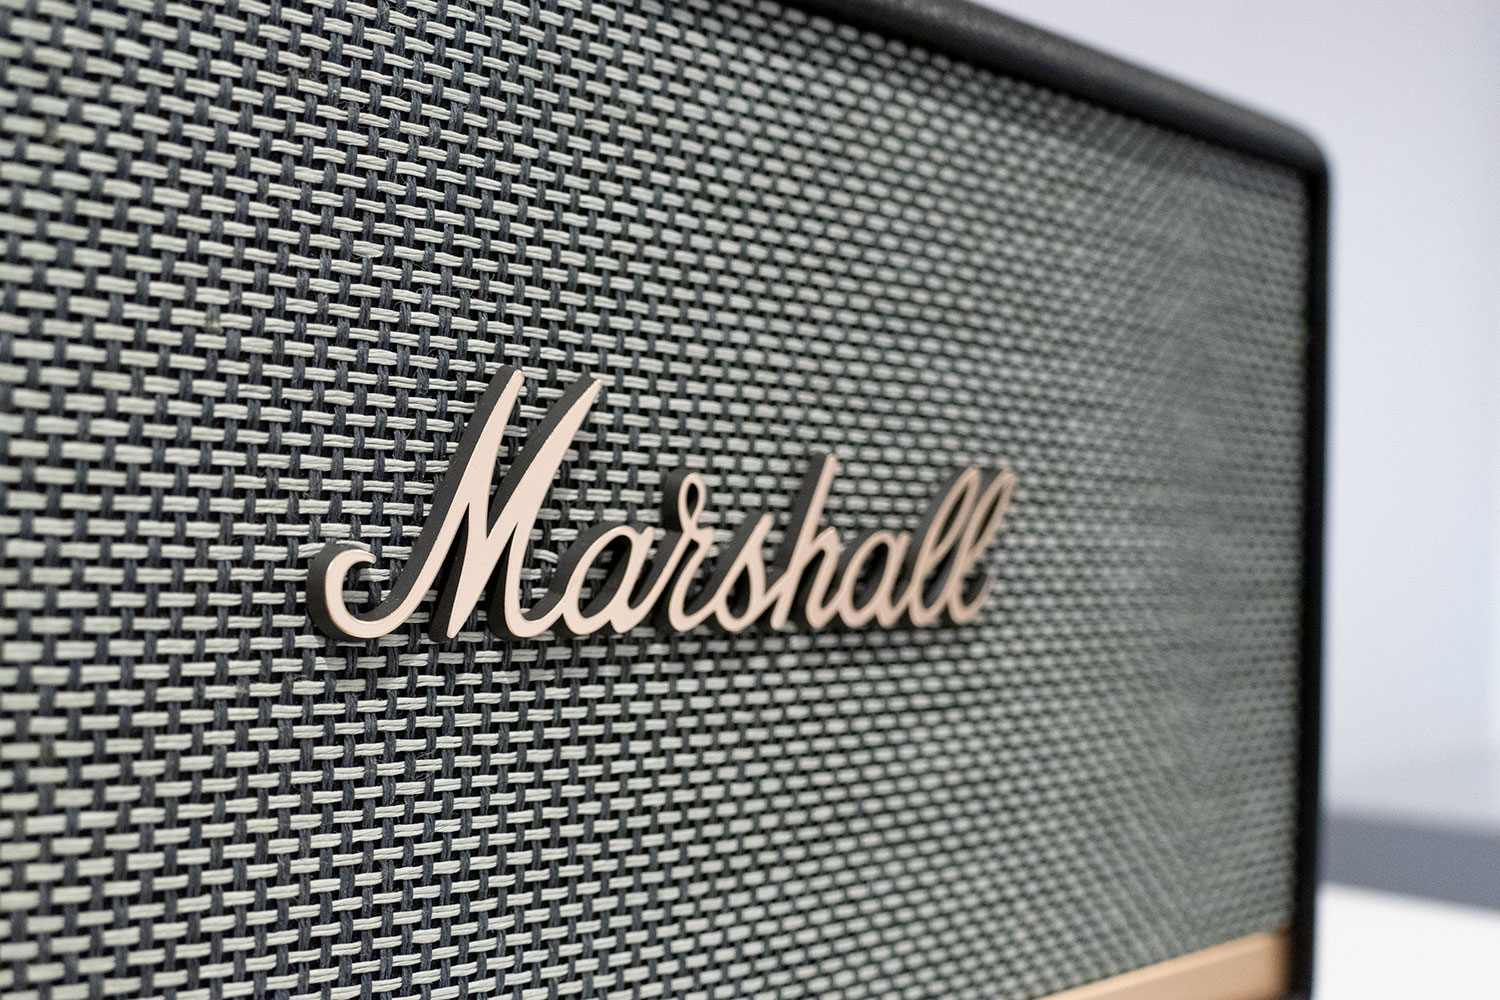 Marshall Stanmore II Voice review